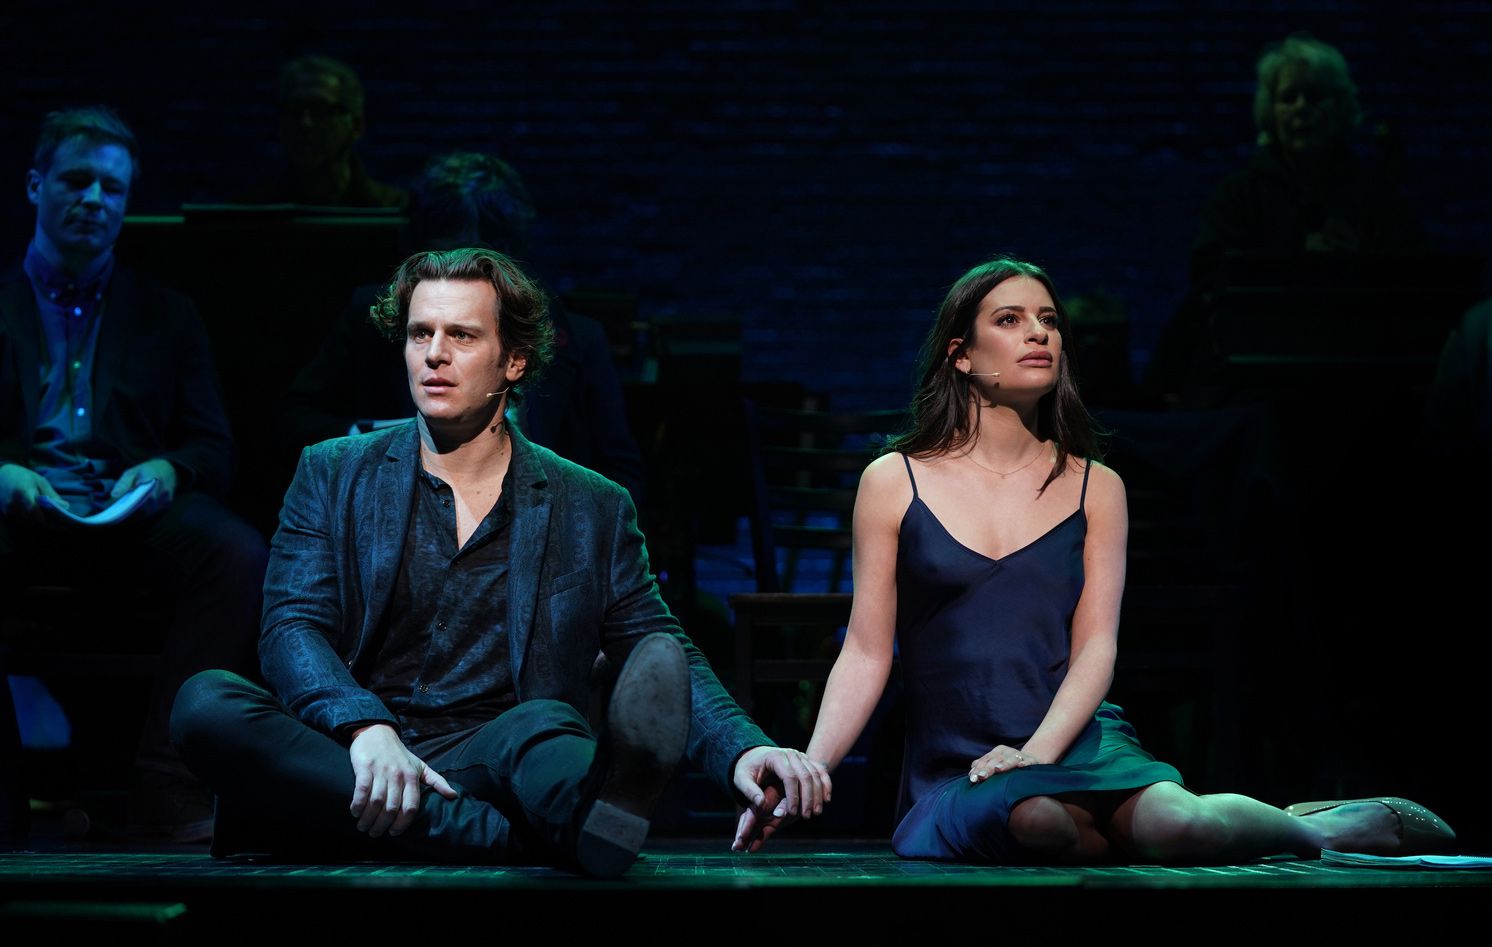 Jonathan Groff and Lea Michele in 'Spring Awakening: Those You've Known'